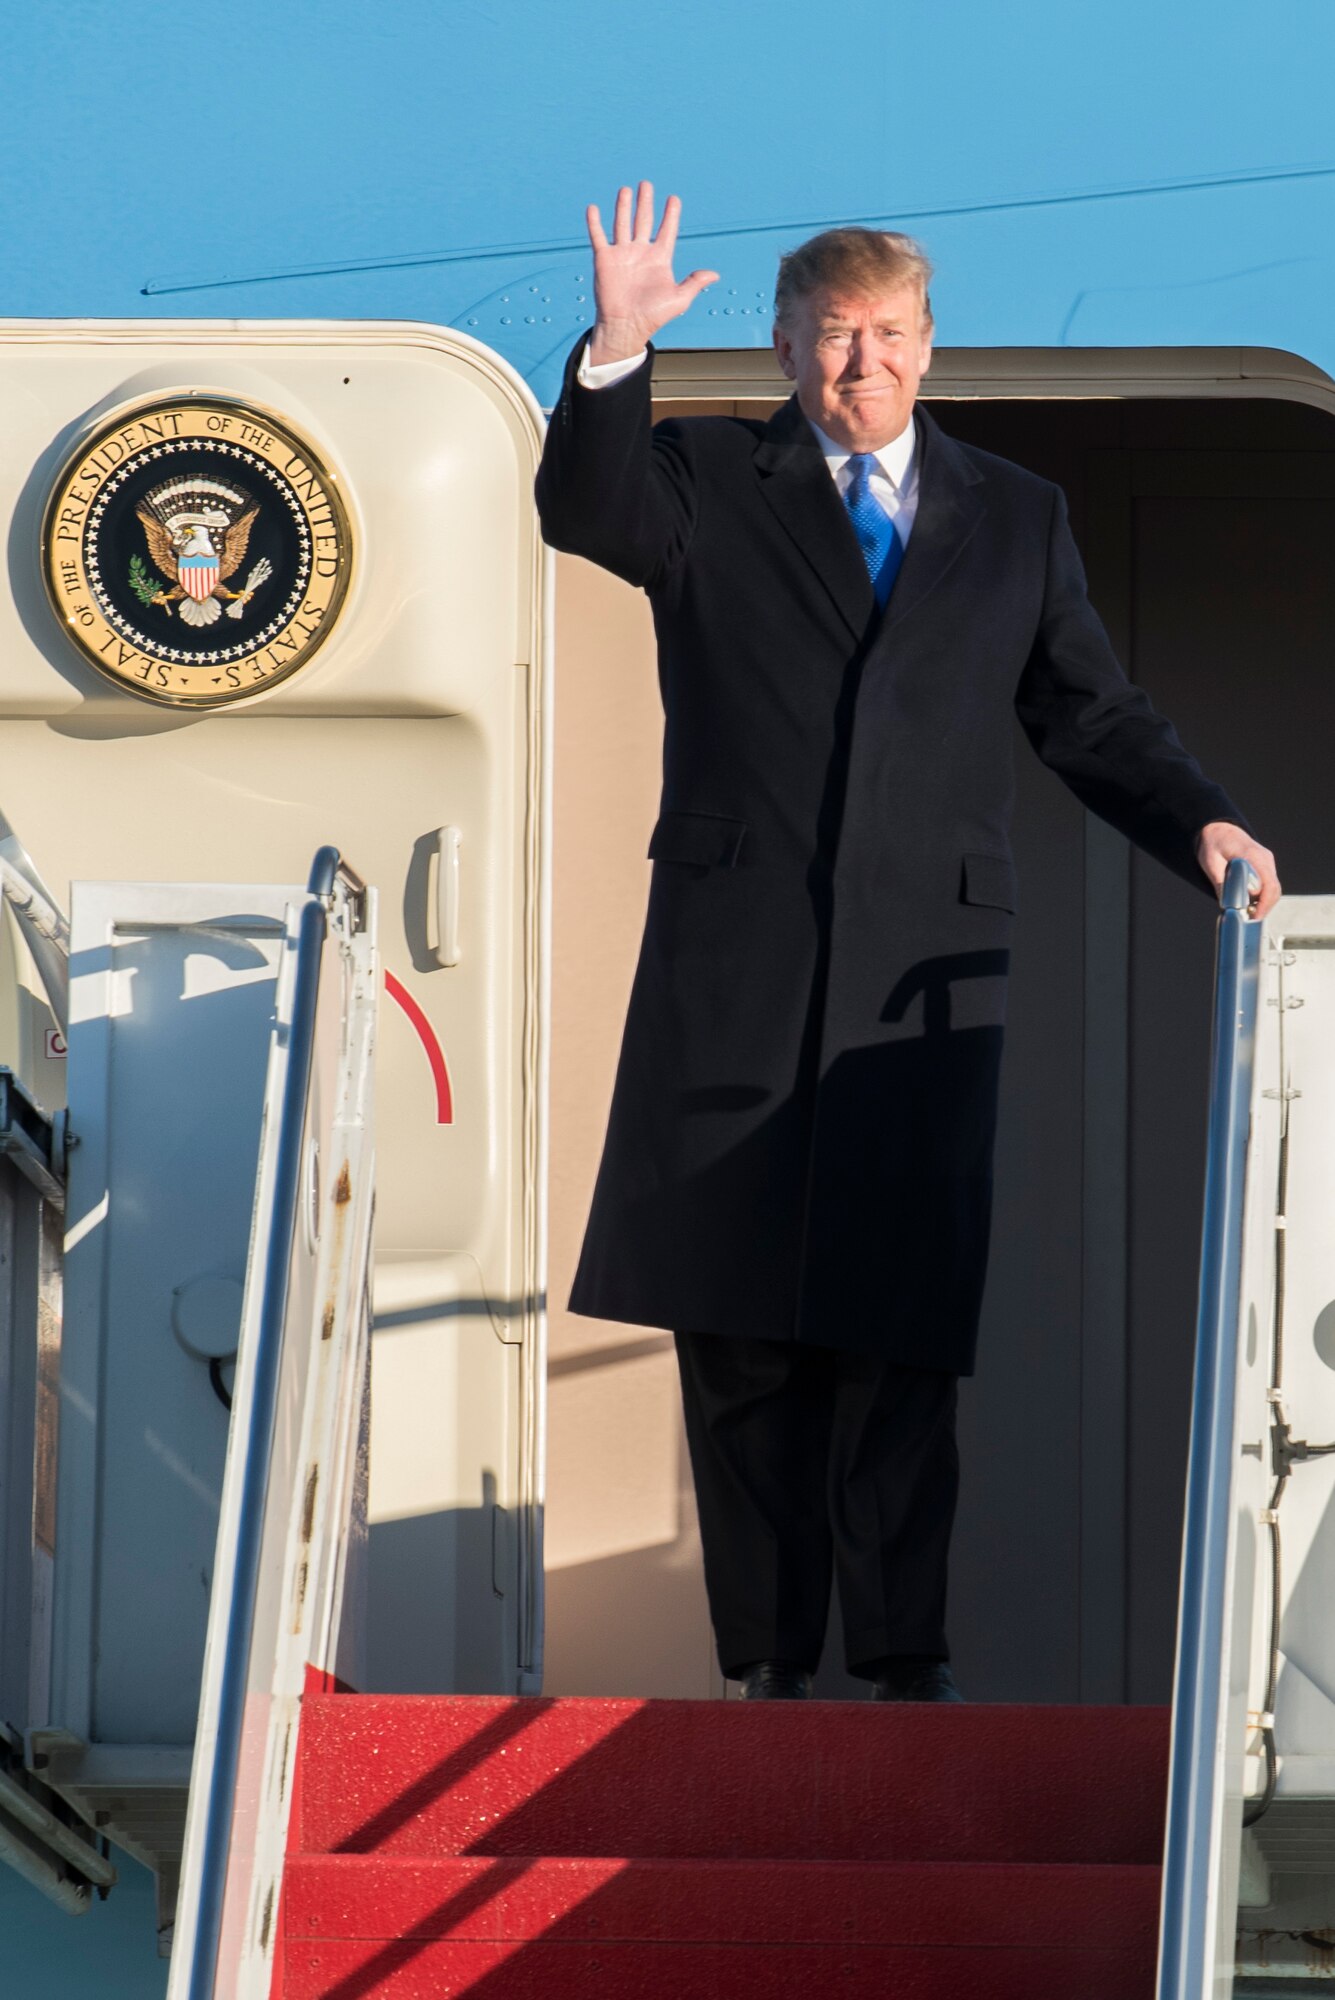 President Donald Trump greets Joint Base Elmendorf-Richardson personnel upon his arrival to JBER, Alaska, Feb. 28, 2019. The president was at the base to meet with service members after returning from a summit in Hanoi, Vietnam.